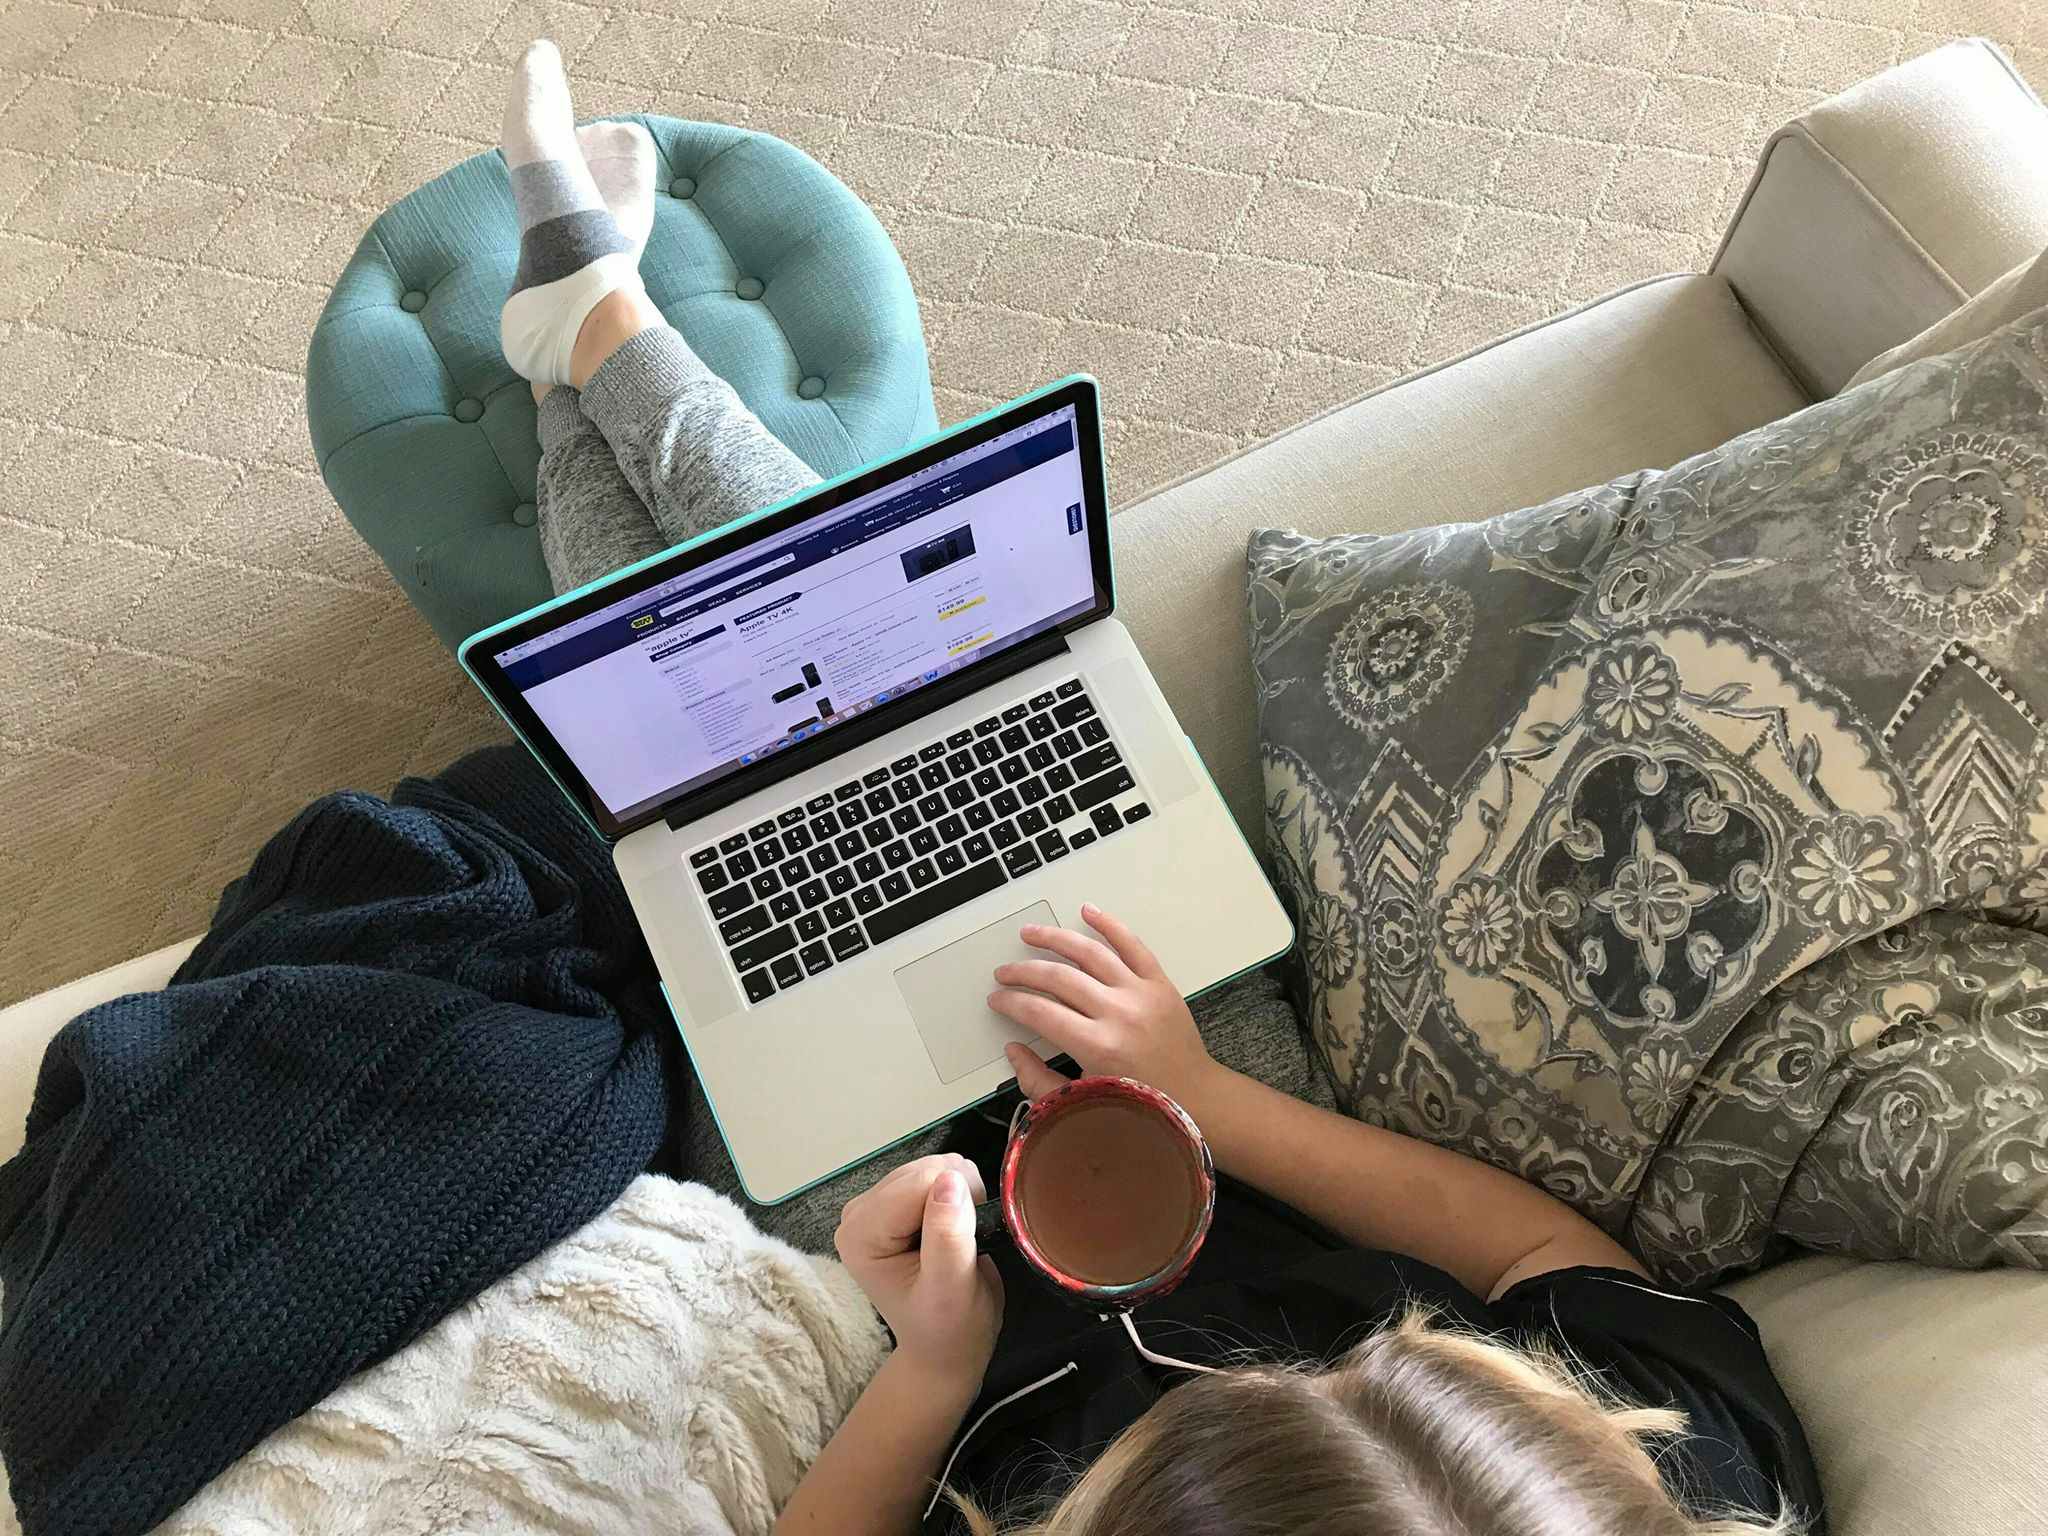 A person sitting on a couch, shopping online using a laptop.